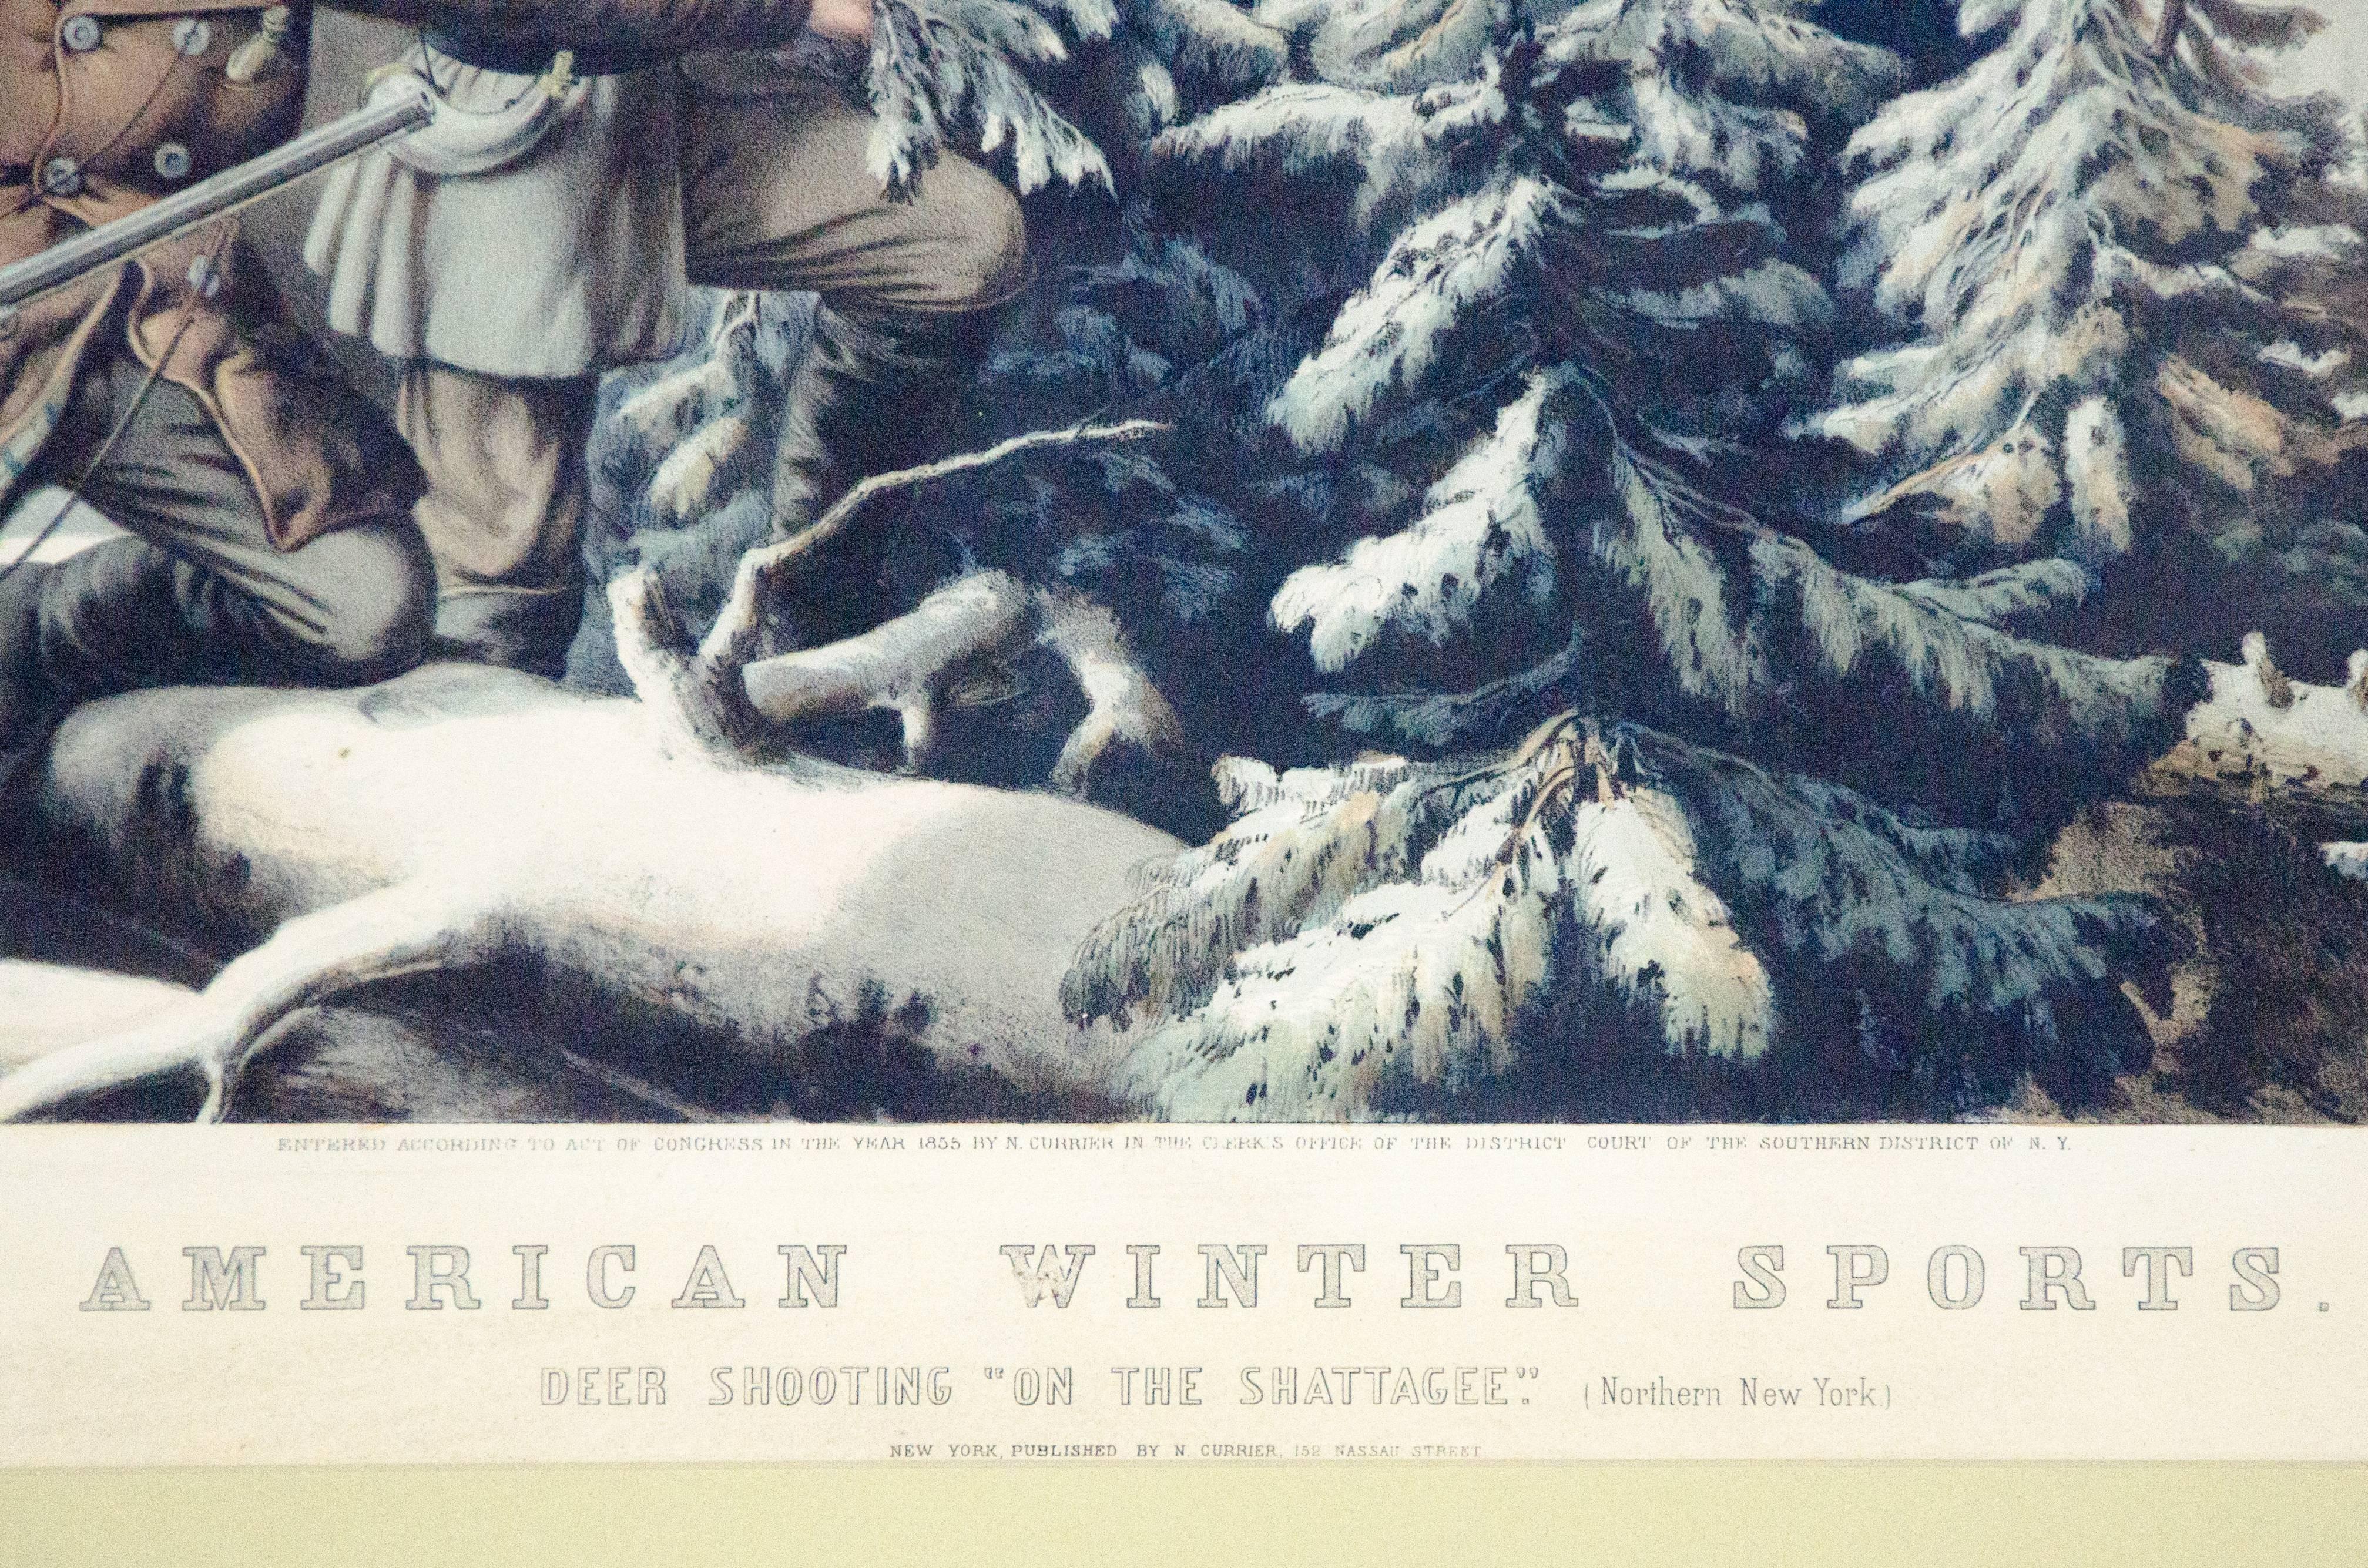 19th Century Currier and Ives, Deer Shooting 